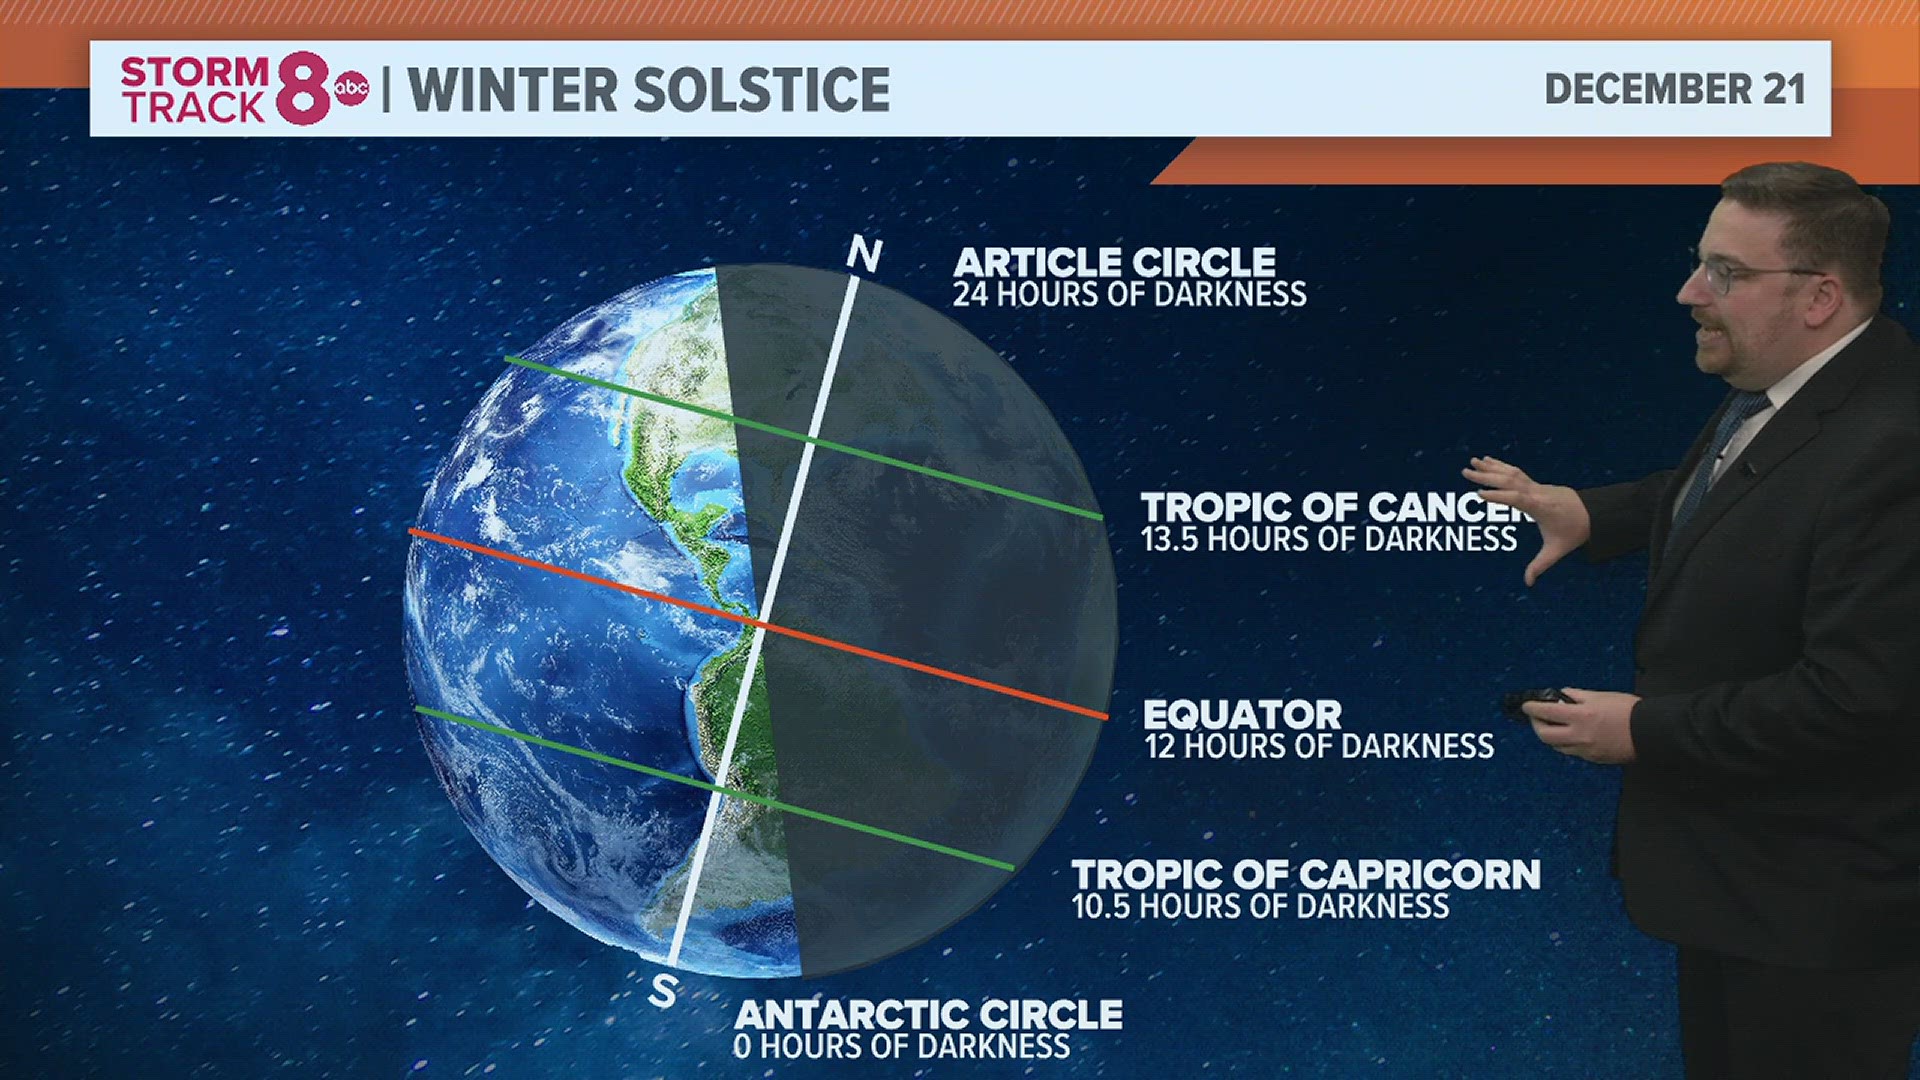 Even though we experience more daylight after the winter solstice, temperatures continue to plunge weeks after. Here's why.